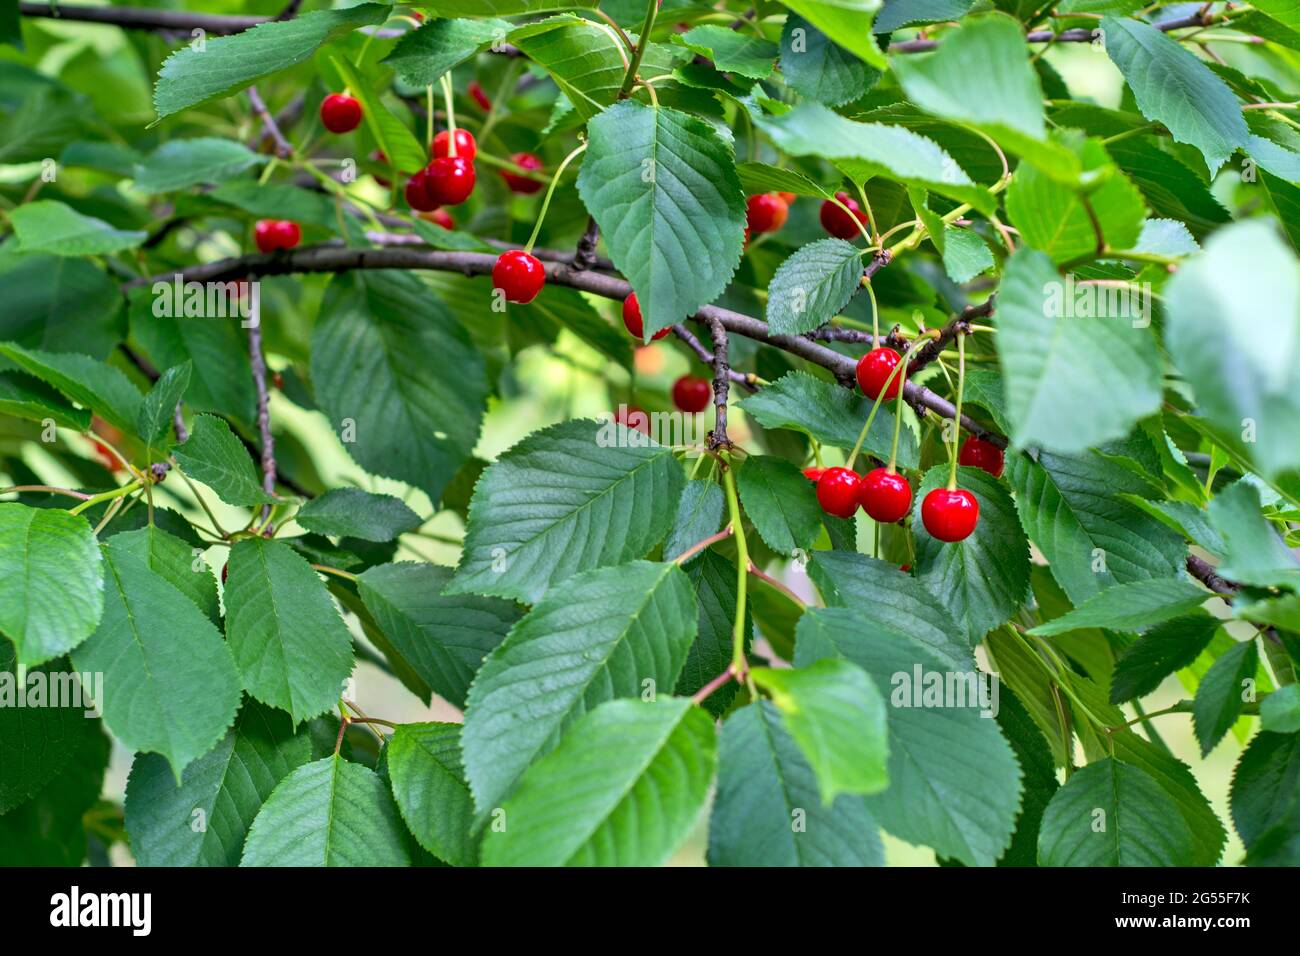 Cherries on a sunlit tree. The cherries are not yet fully ripe. Stock Photo